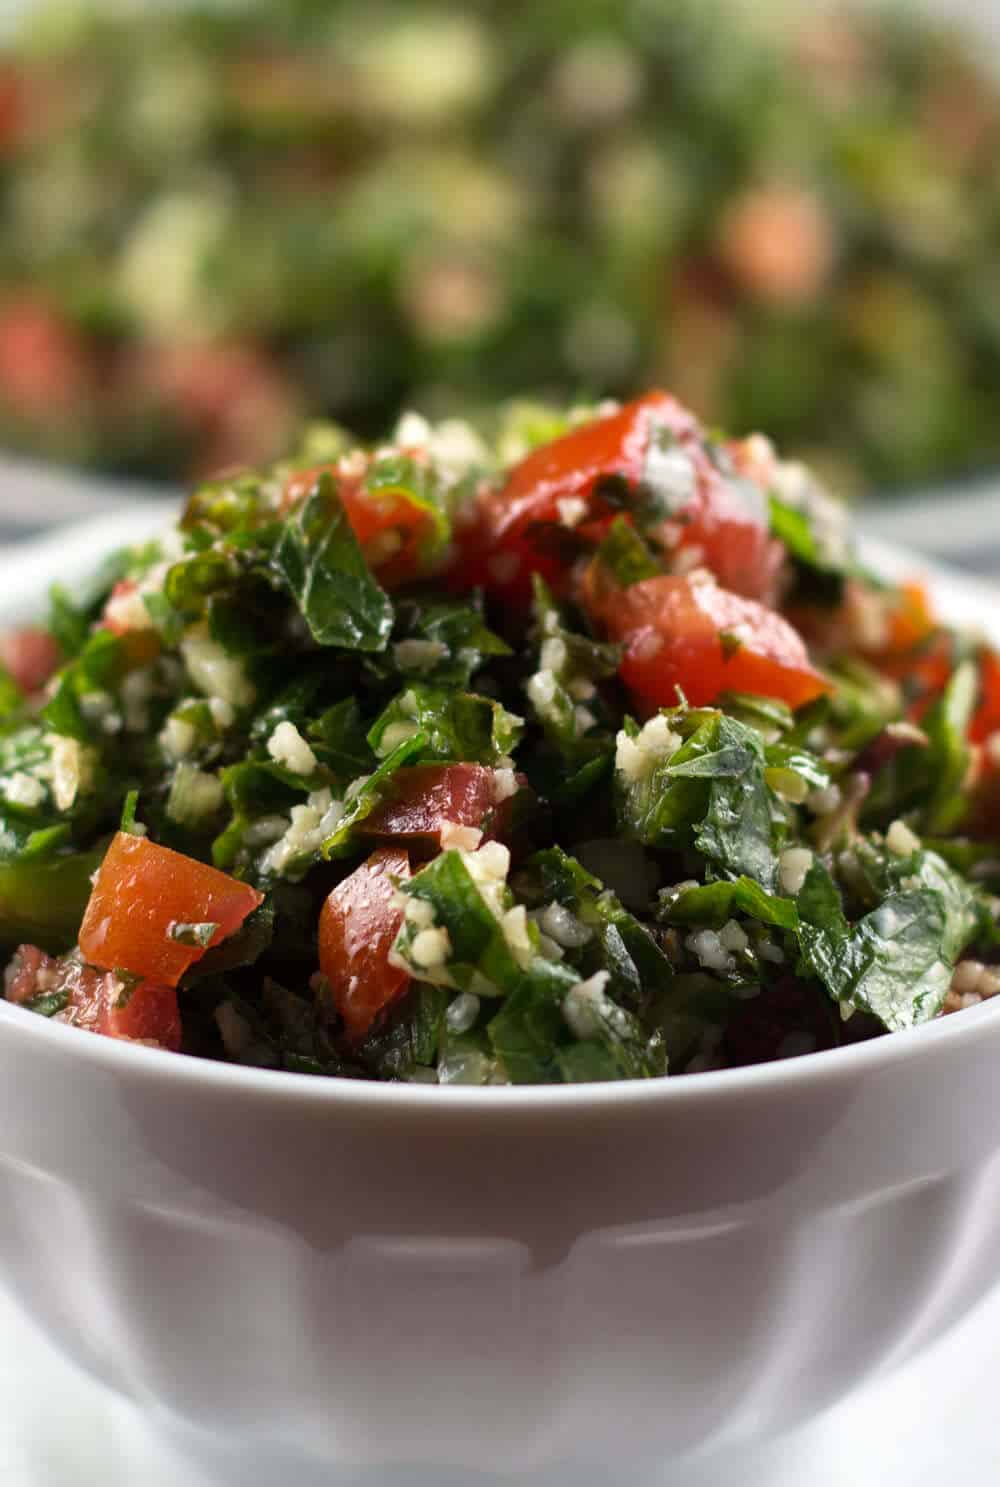 Not-Quite Traditional Tabouli or Tabbouleh - a perfect salad when you don't want to eat lettuce. From Mother Would Know